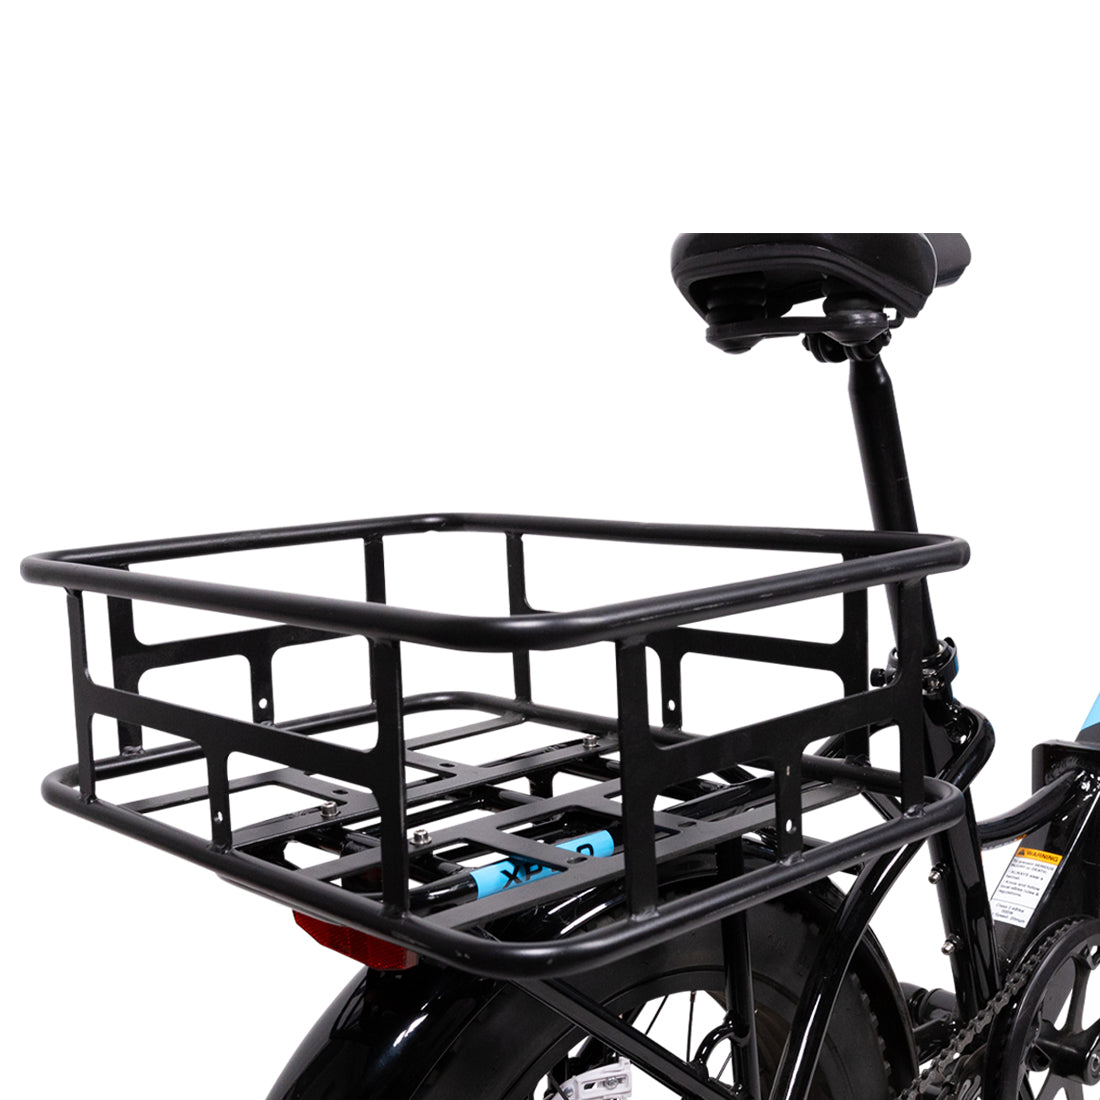 Large basket mounted to the rear rack of a Lectric XP 3.0 ebike